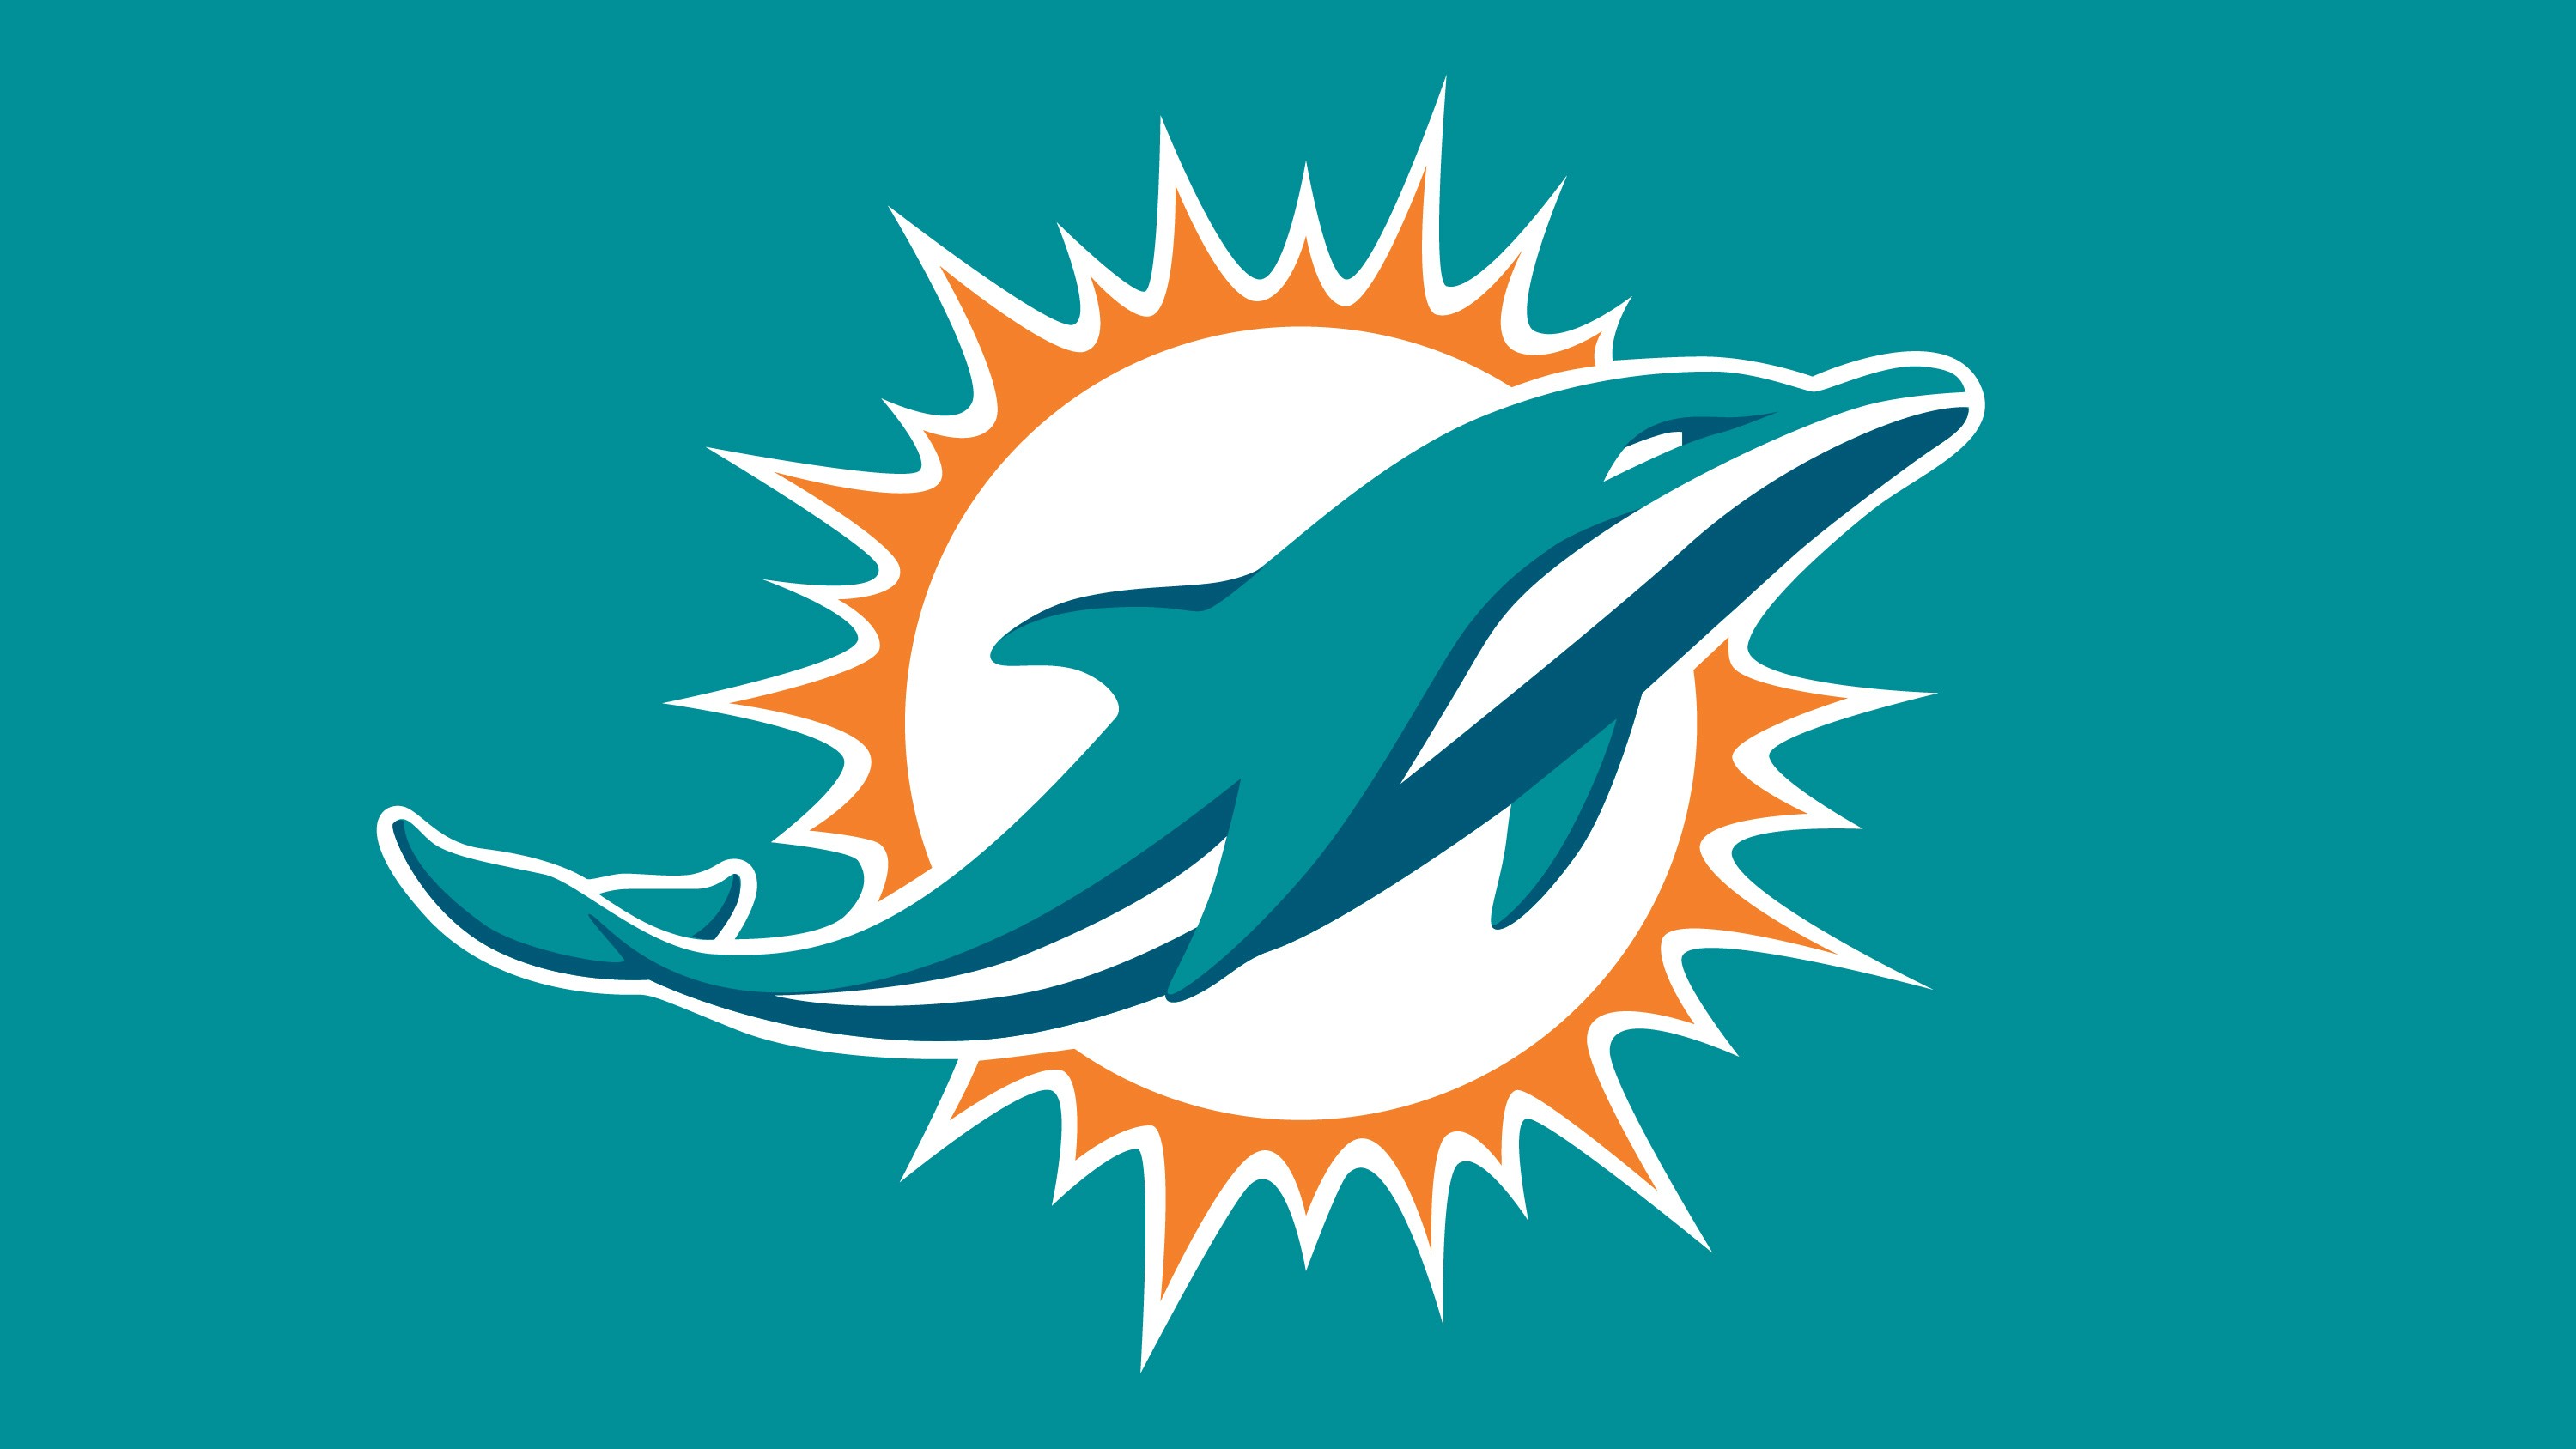 Clip Arts Related To : Miami Dolphins Png Miami Dolphins Logo. view all .....